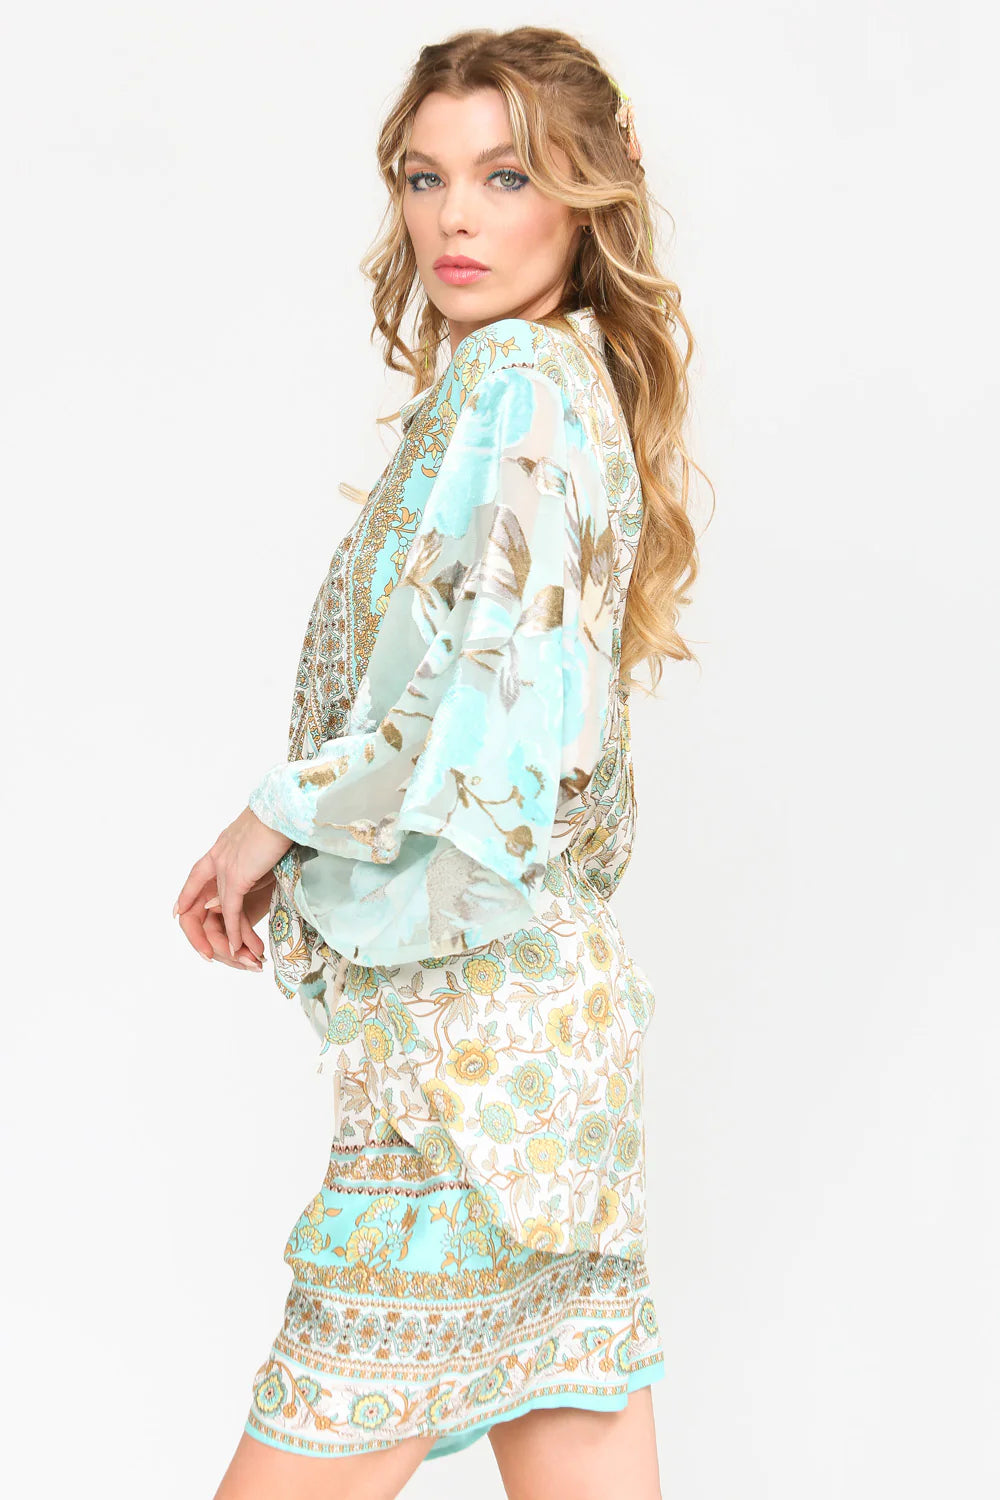 Baby Blue Shirt With Flowers And Printed Sleeves